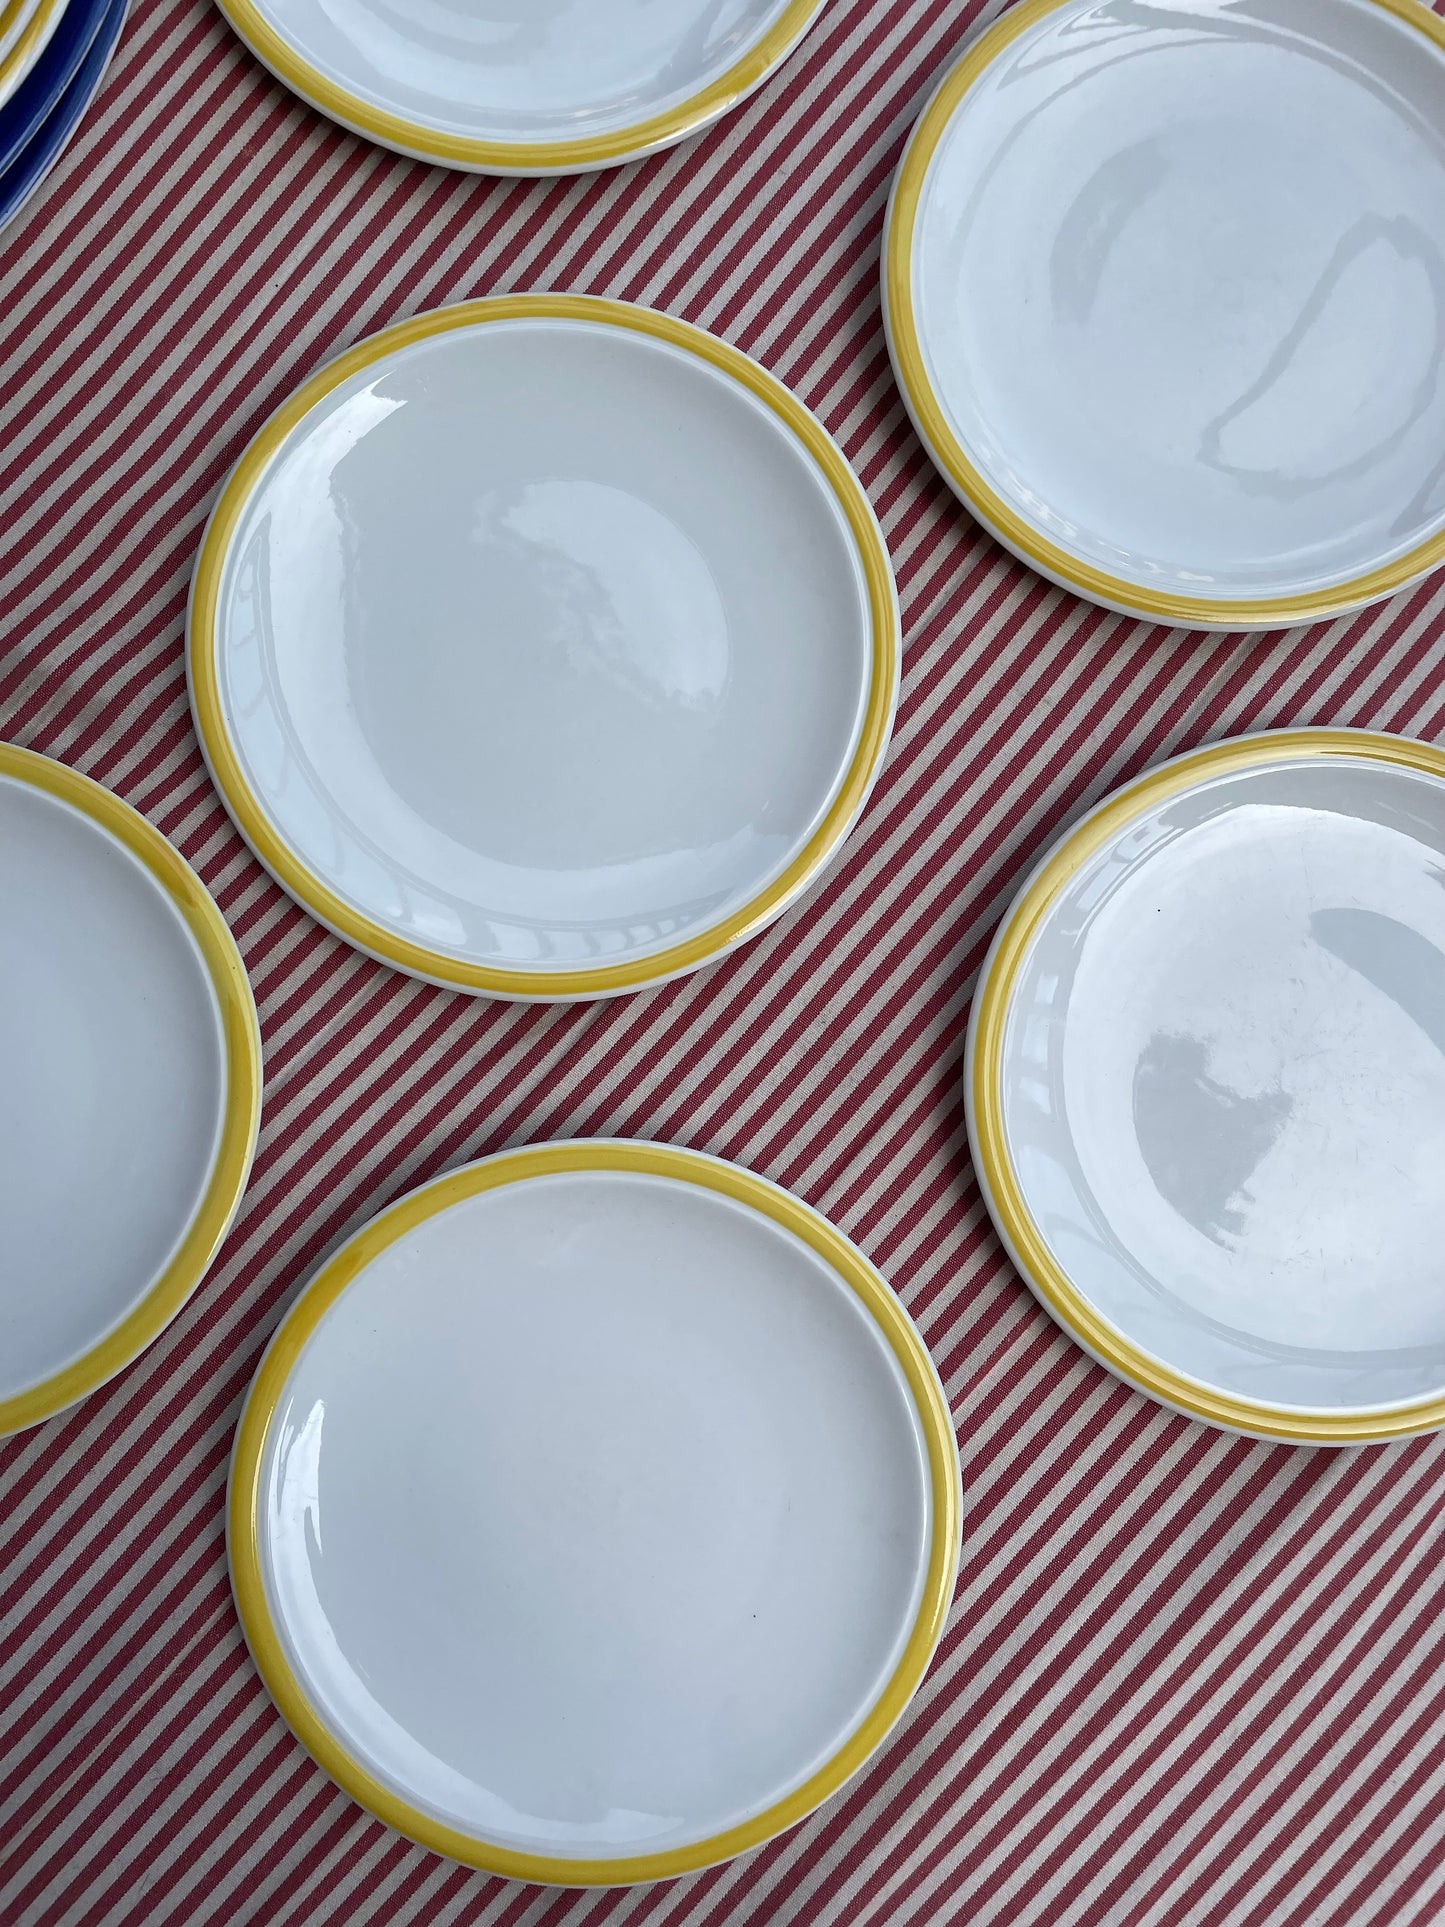 Lunch plates with yellow rim